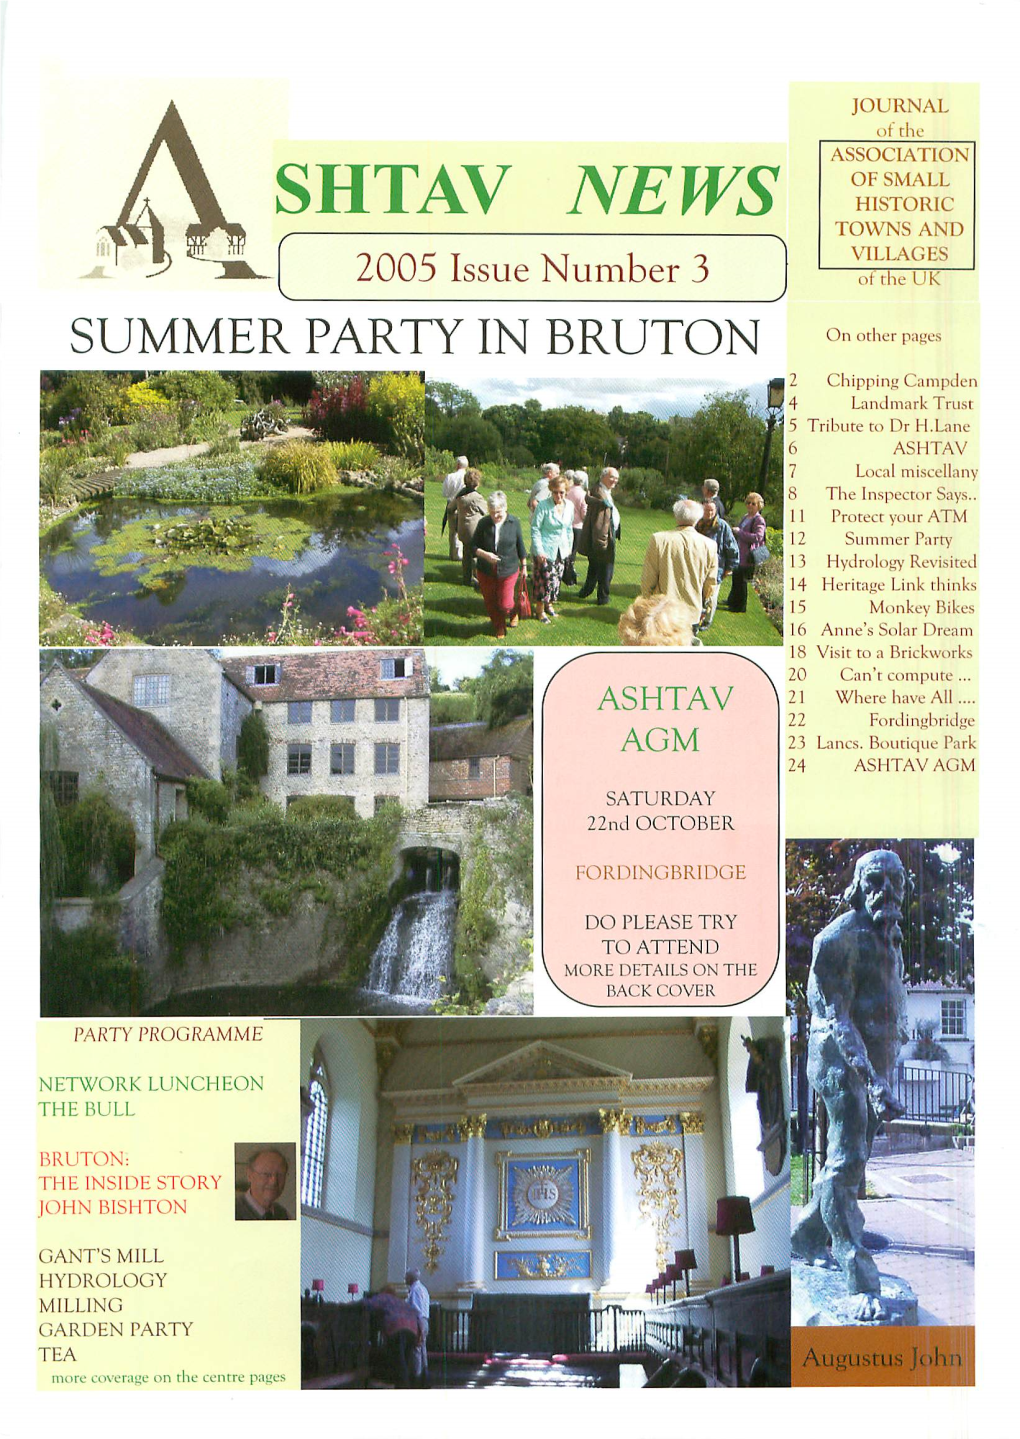 SHTAV NEWS HISTORIC TOWNS and VILLAGES 2005 Issue Number 3 of the UK